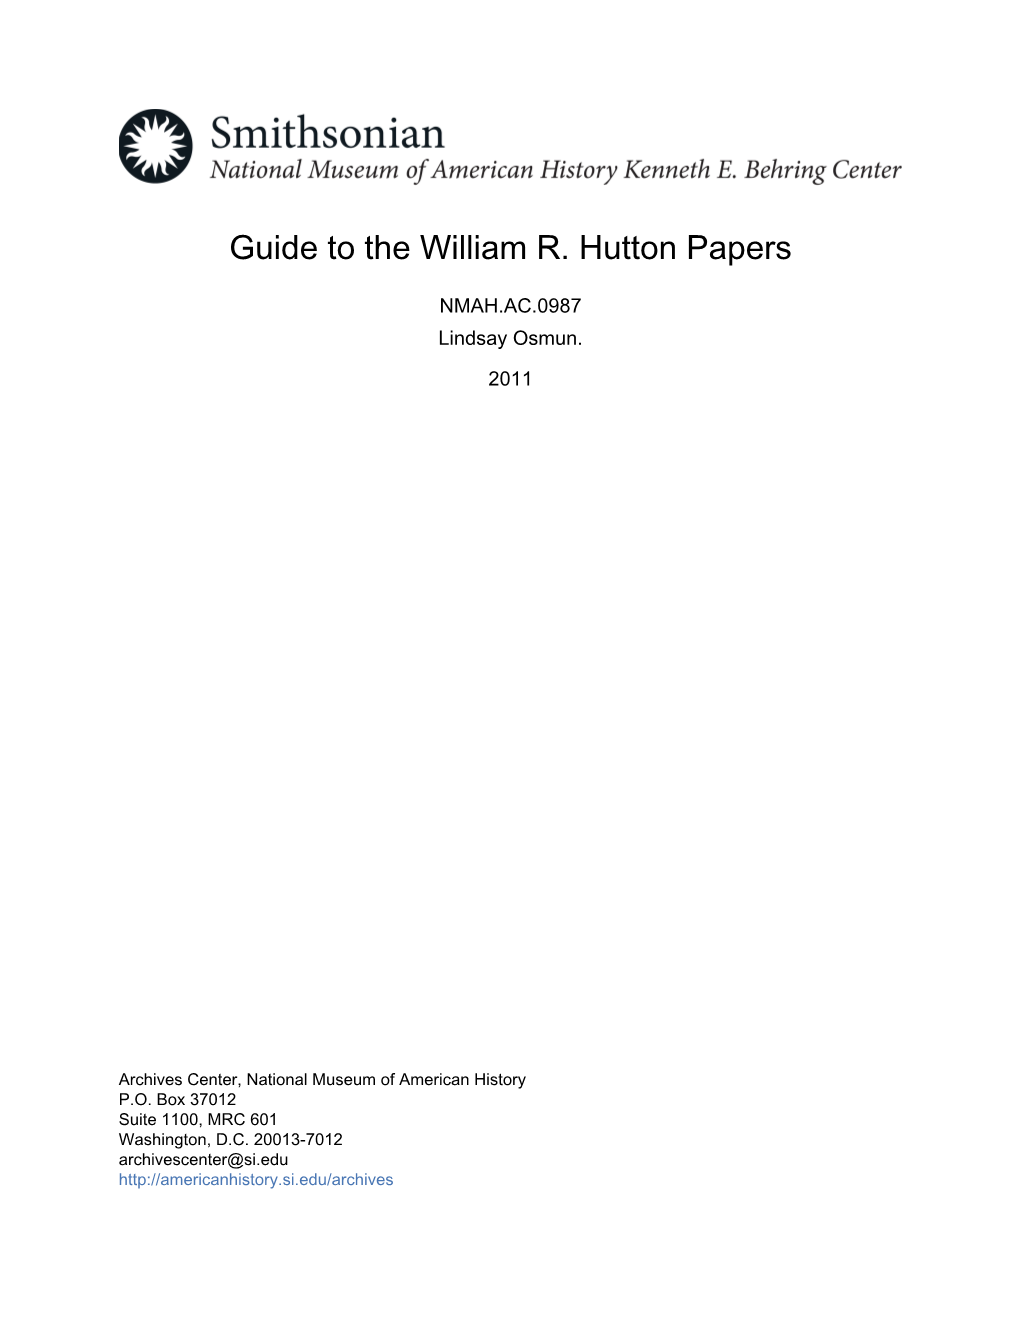 Guide to the William R. Hutton Papers